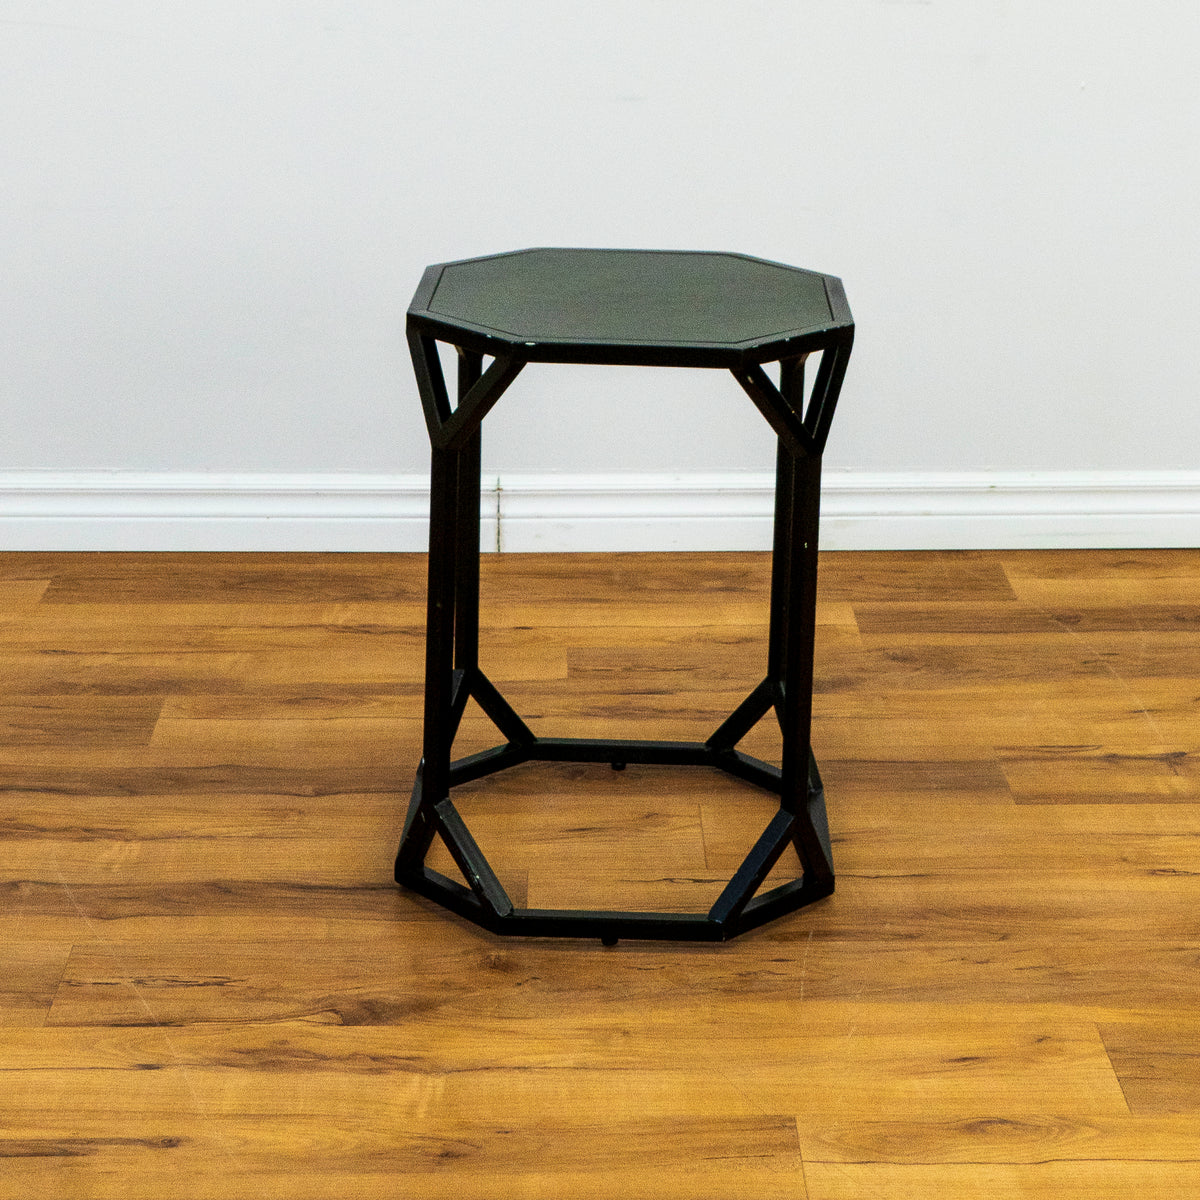 Black Hexahedron Side Table